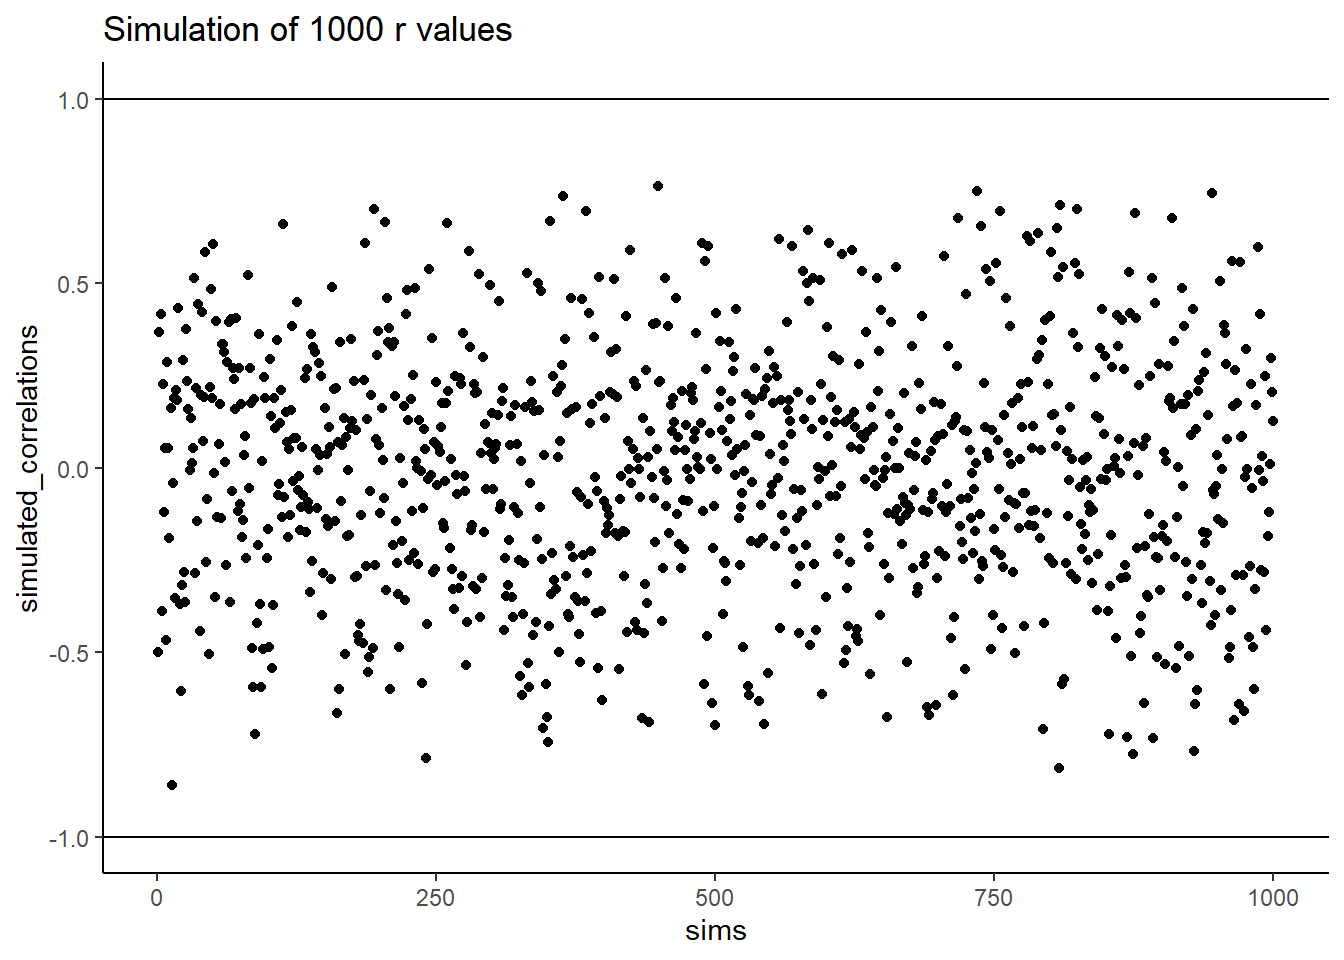 Another figure showing a range of r-values that can be obtained by chance